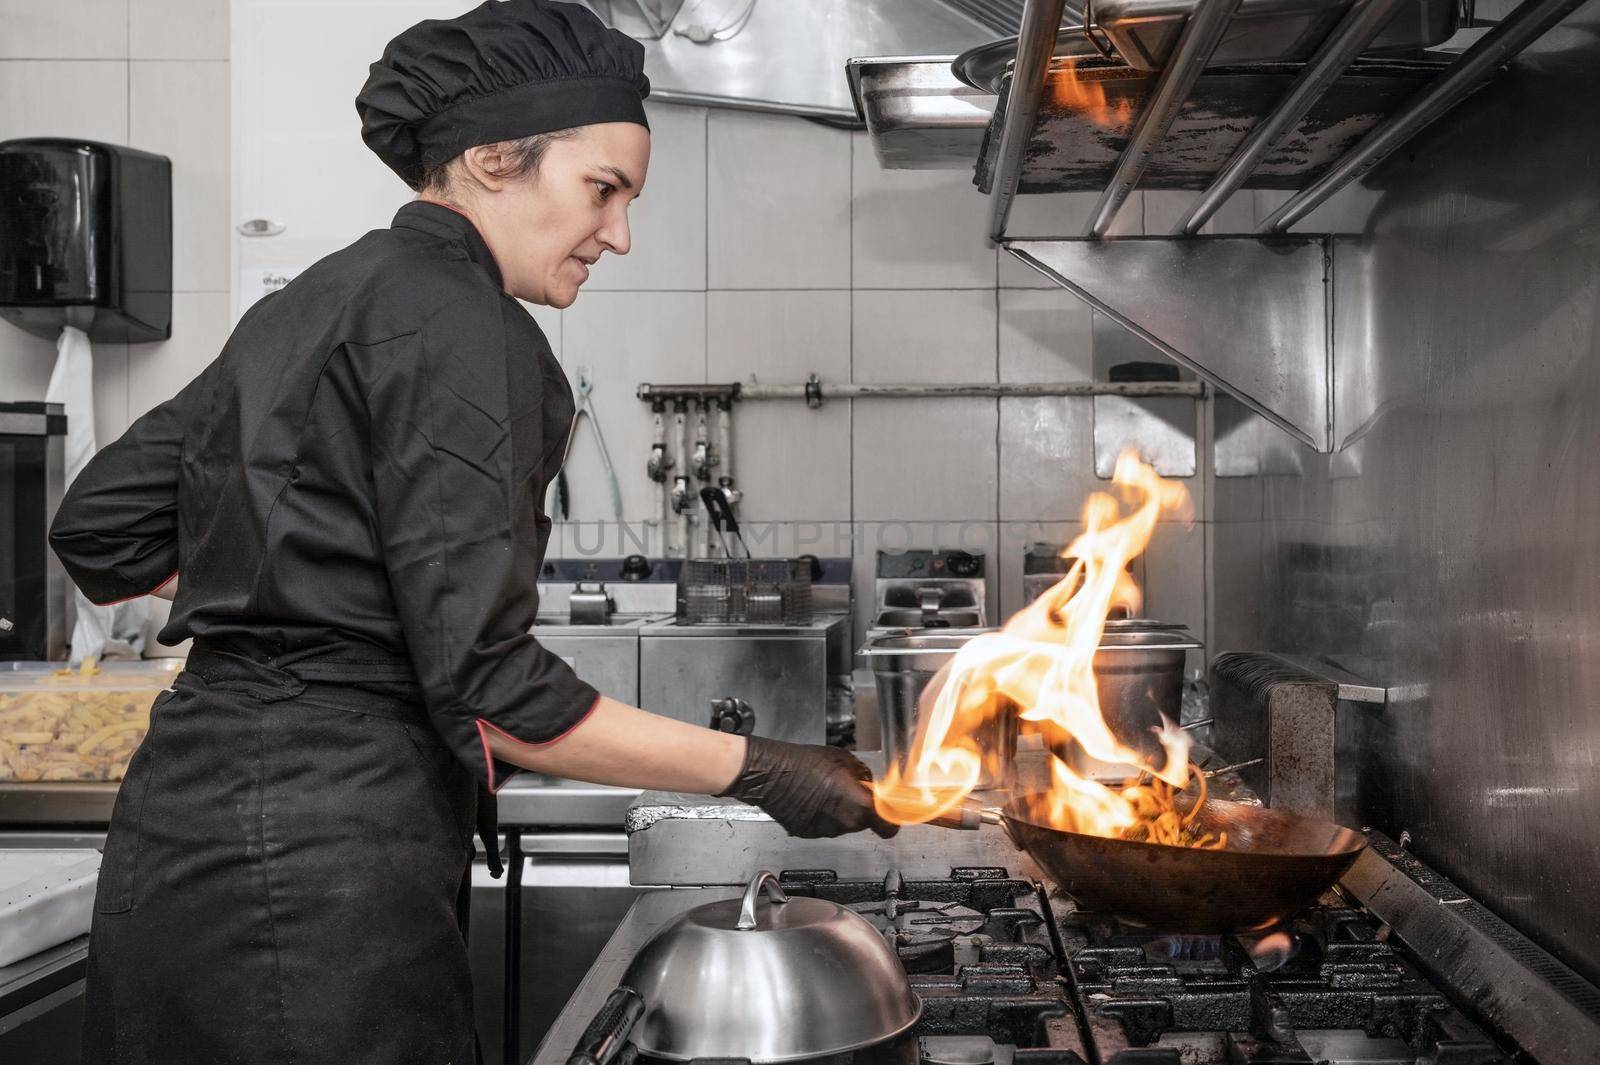 Woman Chef Cooking wok in the Kitchen. Cooking flaming wok with vegetables in the commercial kitchen. by HERRAEZ